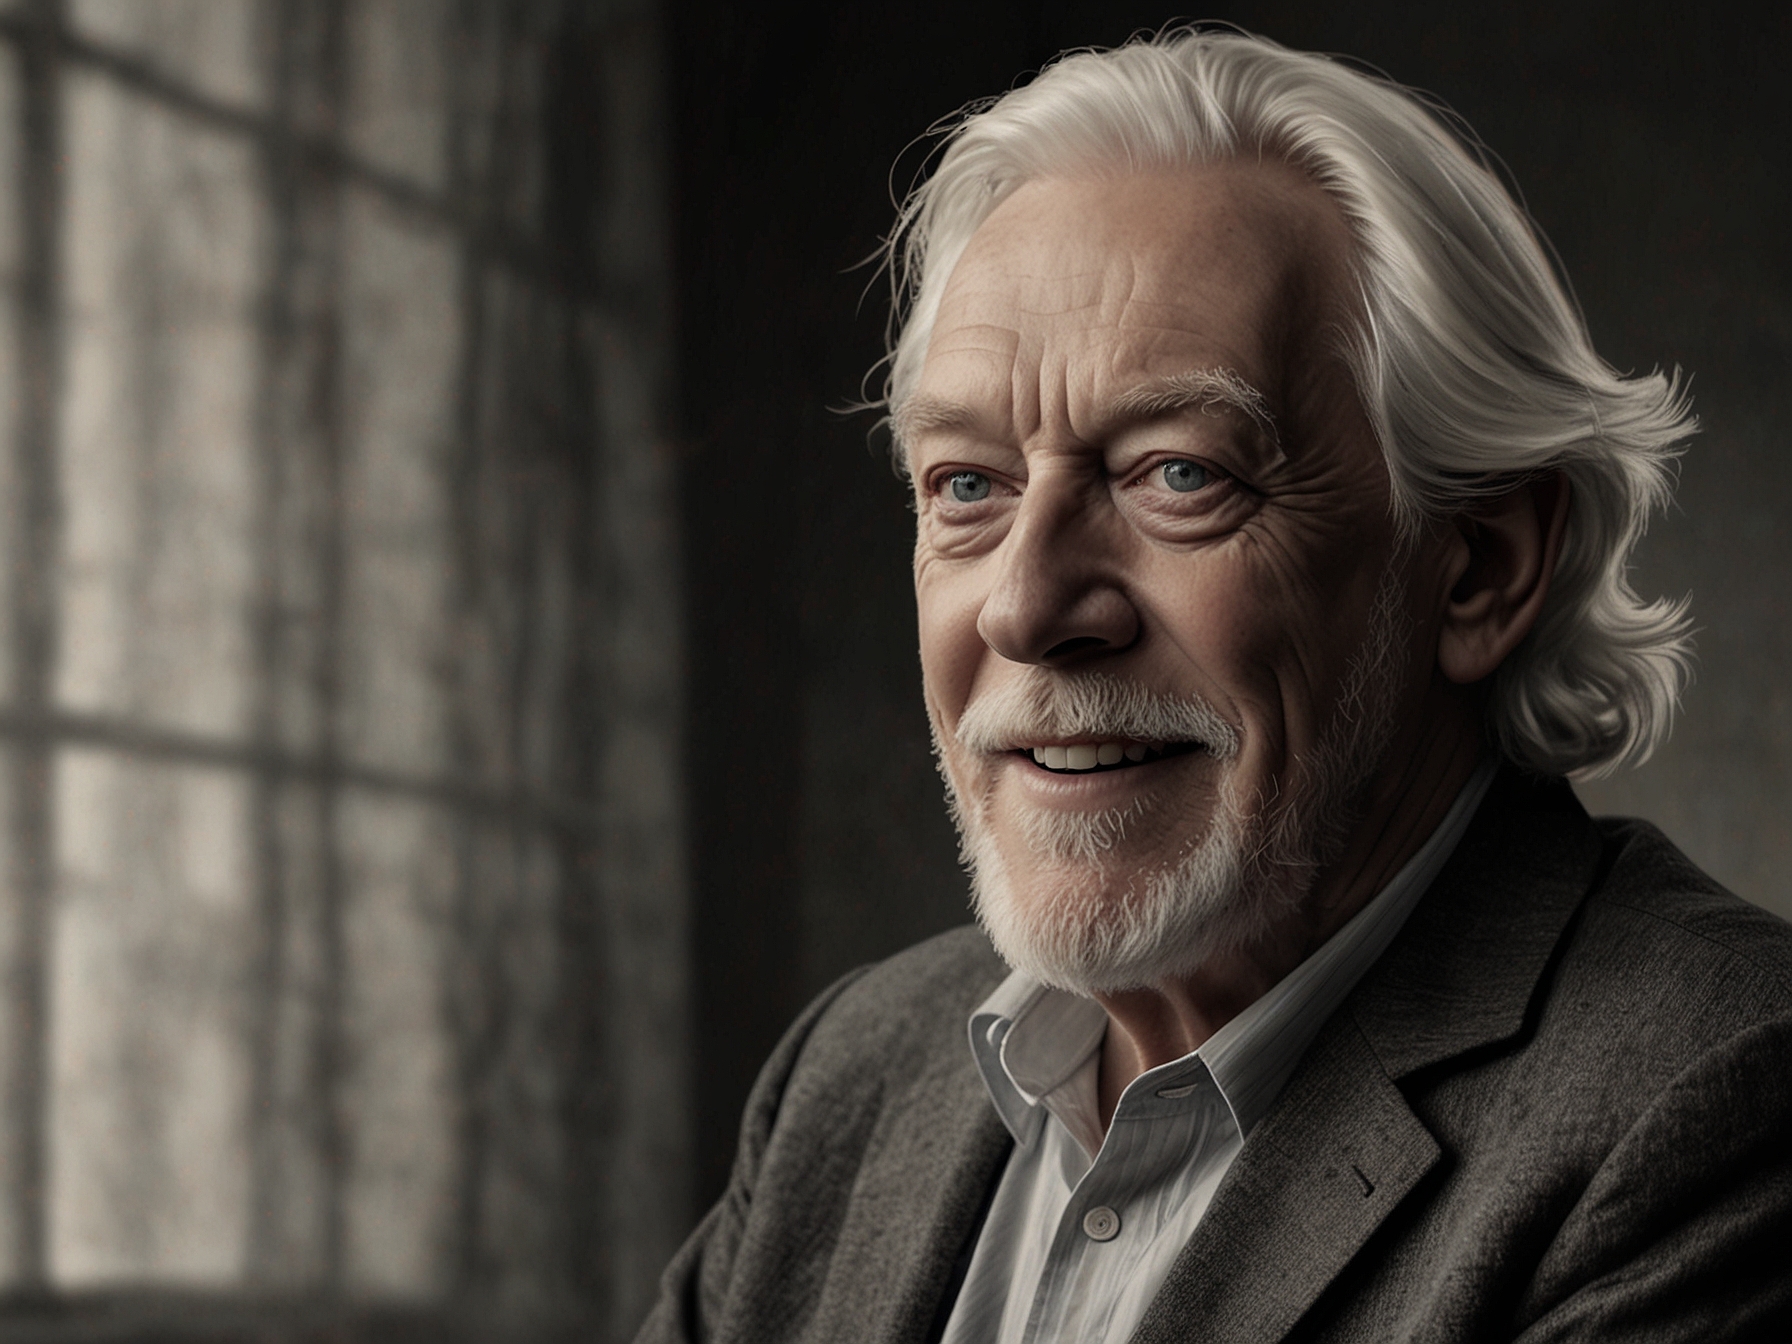 Donald Sutherland smiling and conversing during his final public appearance in March 2021, illustrating his resilient spirit and positive outlook on life despite facing illness.